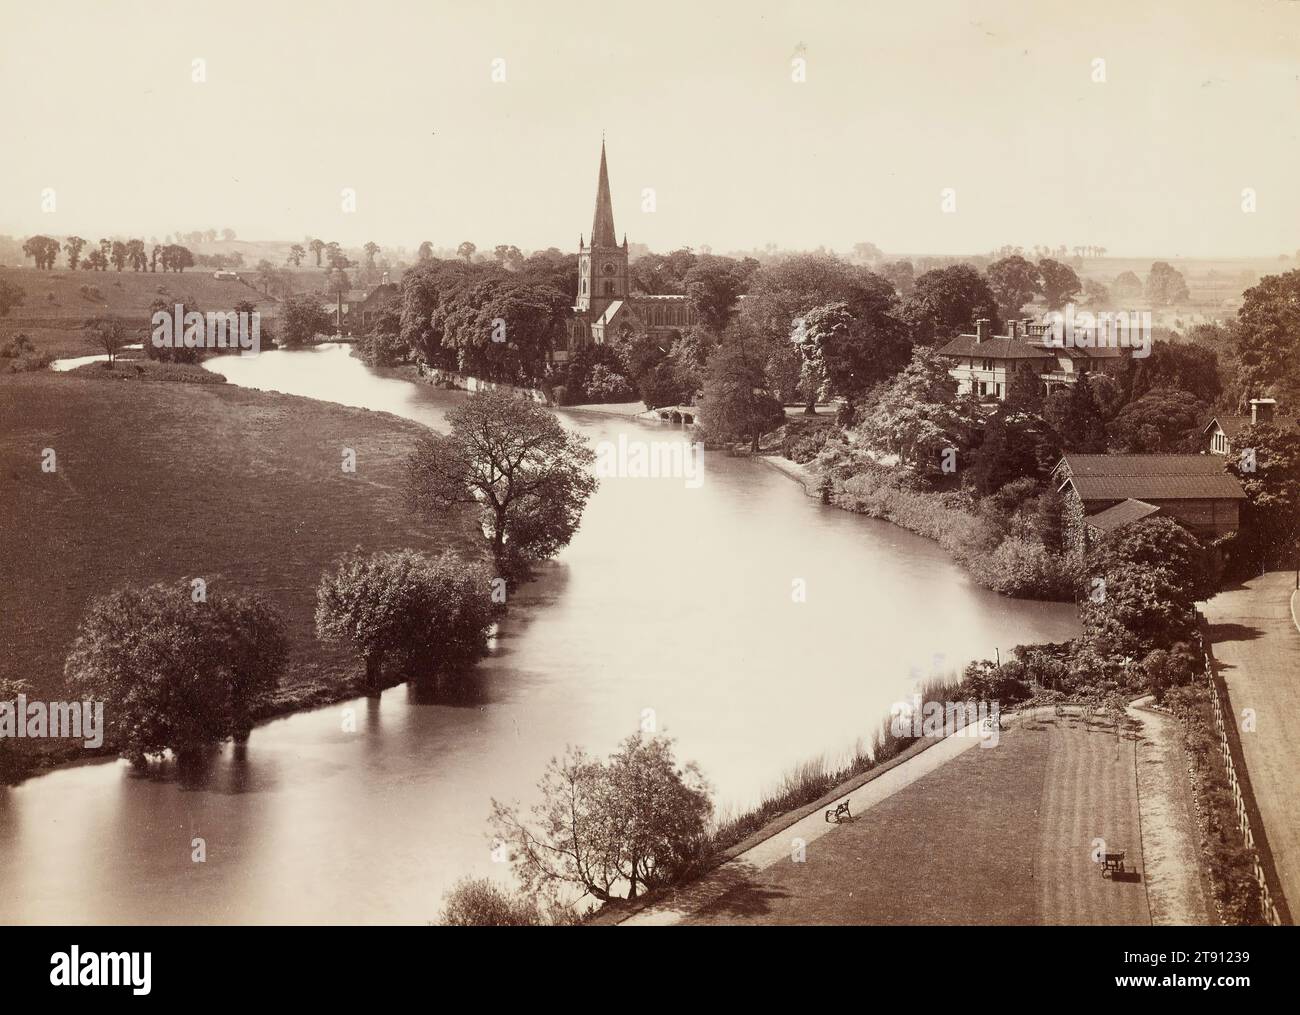 Church and River from Memorial, Stratford-on-Avon, England, 19th century, Francis Bedford, British, 1816 - 1894, 6 3/16 x 8 11/16 in. (15.72 x 22.07 cm) (image)11 1/16 x 13 15/16 in. (28.1 x 35.4 cm) (mount), Albumen print, England, 19th century Stock Photo